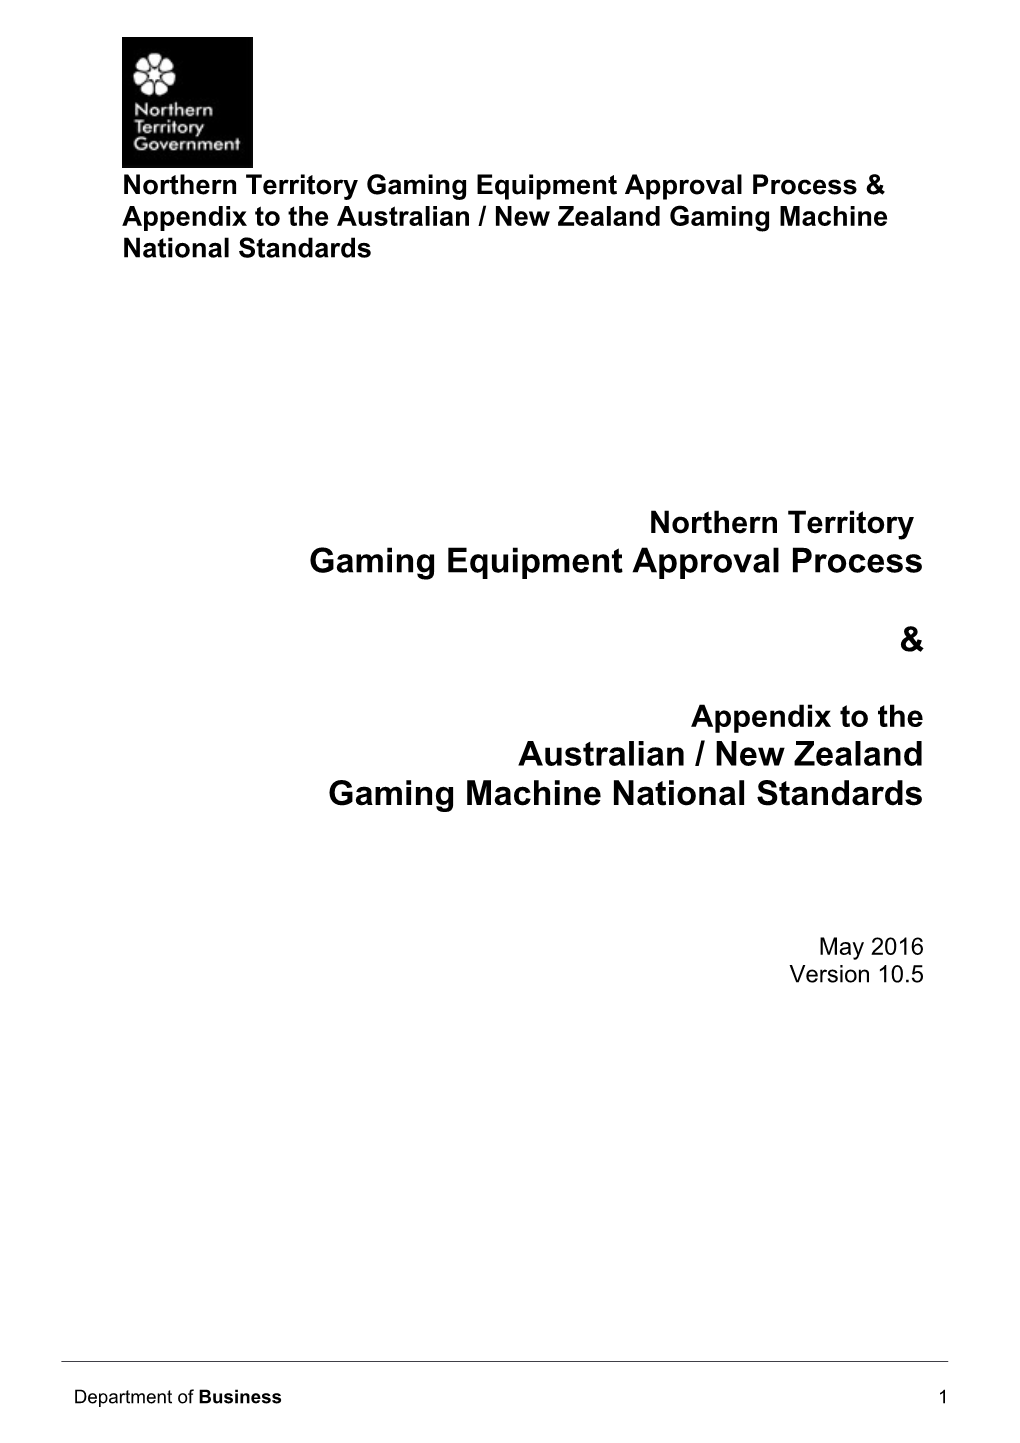 NT Gaming Equipment Approval Process and Appendix to the Gaming Machine National Standards